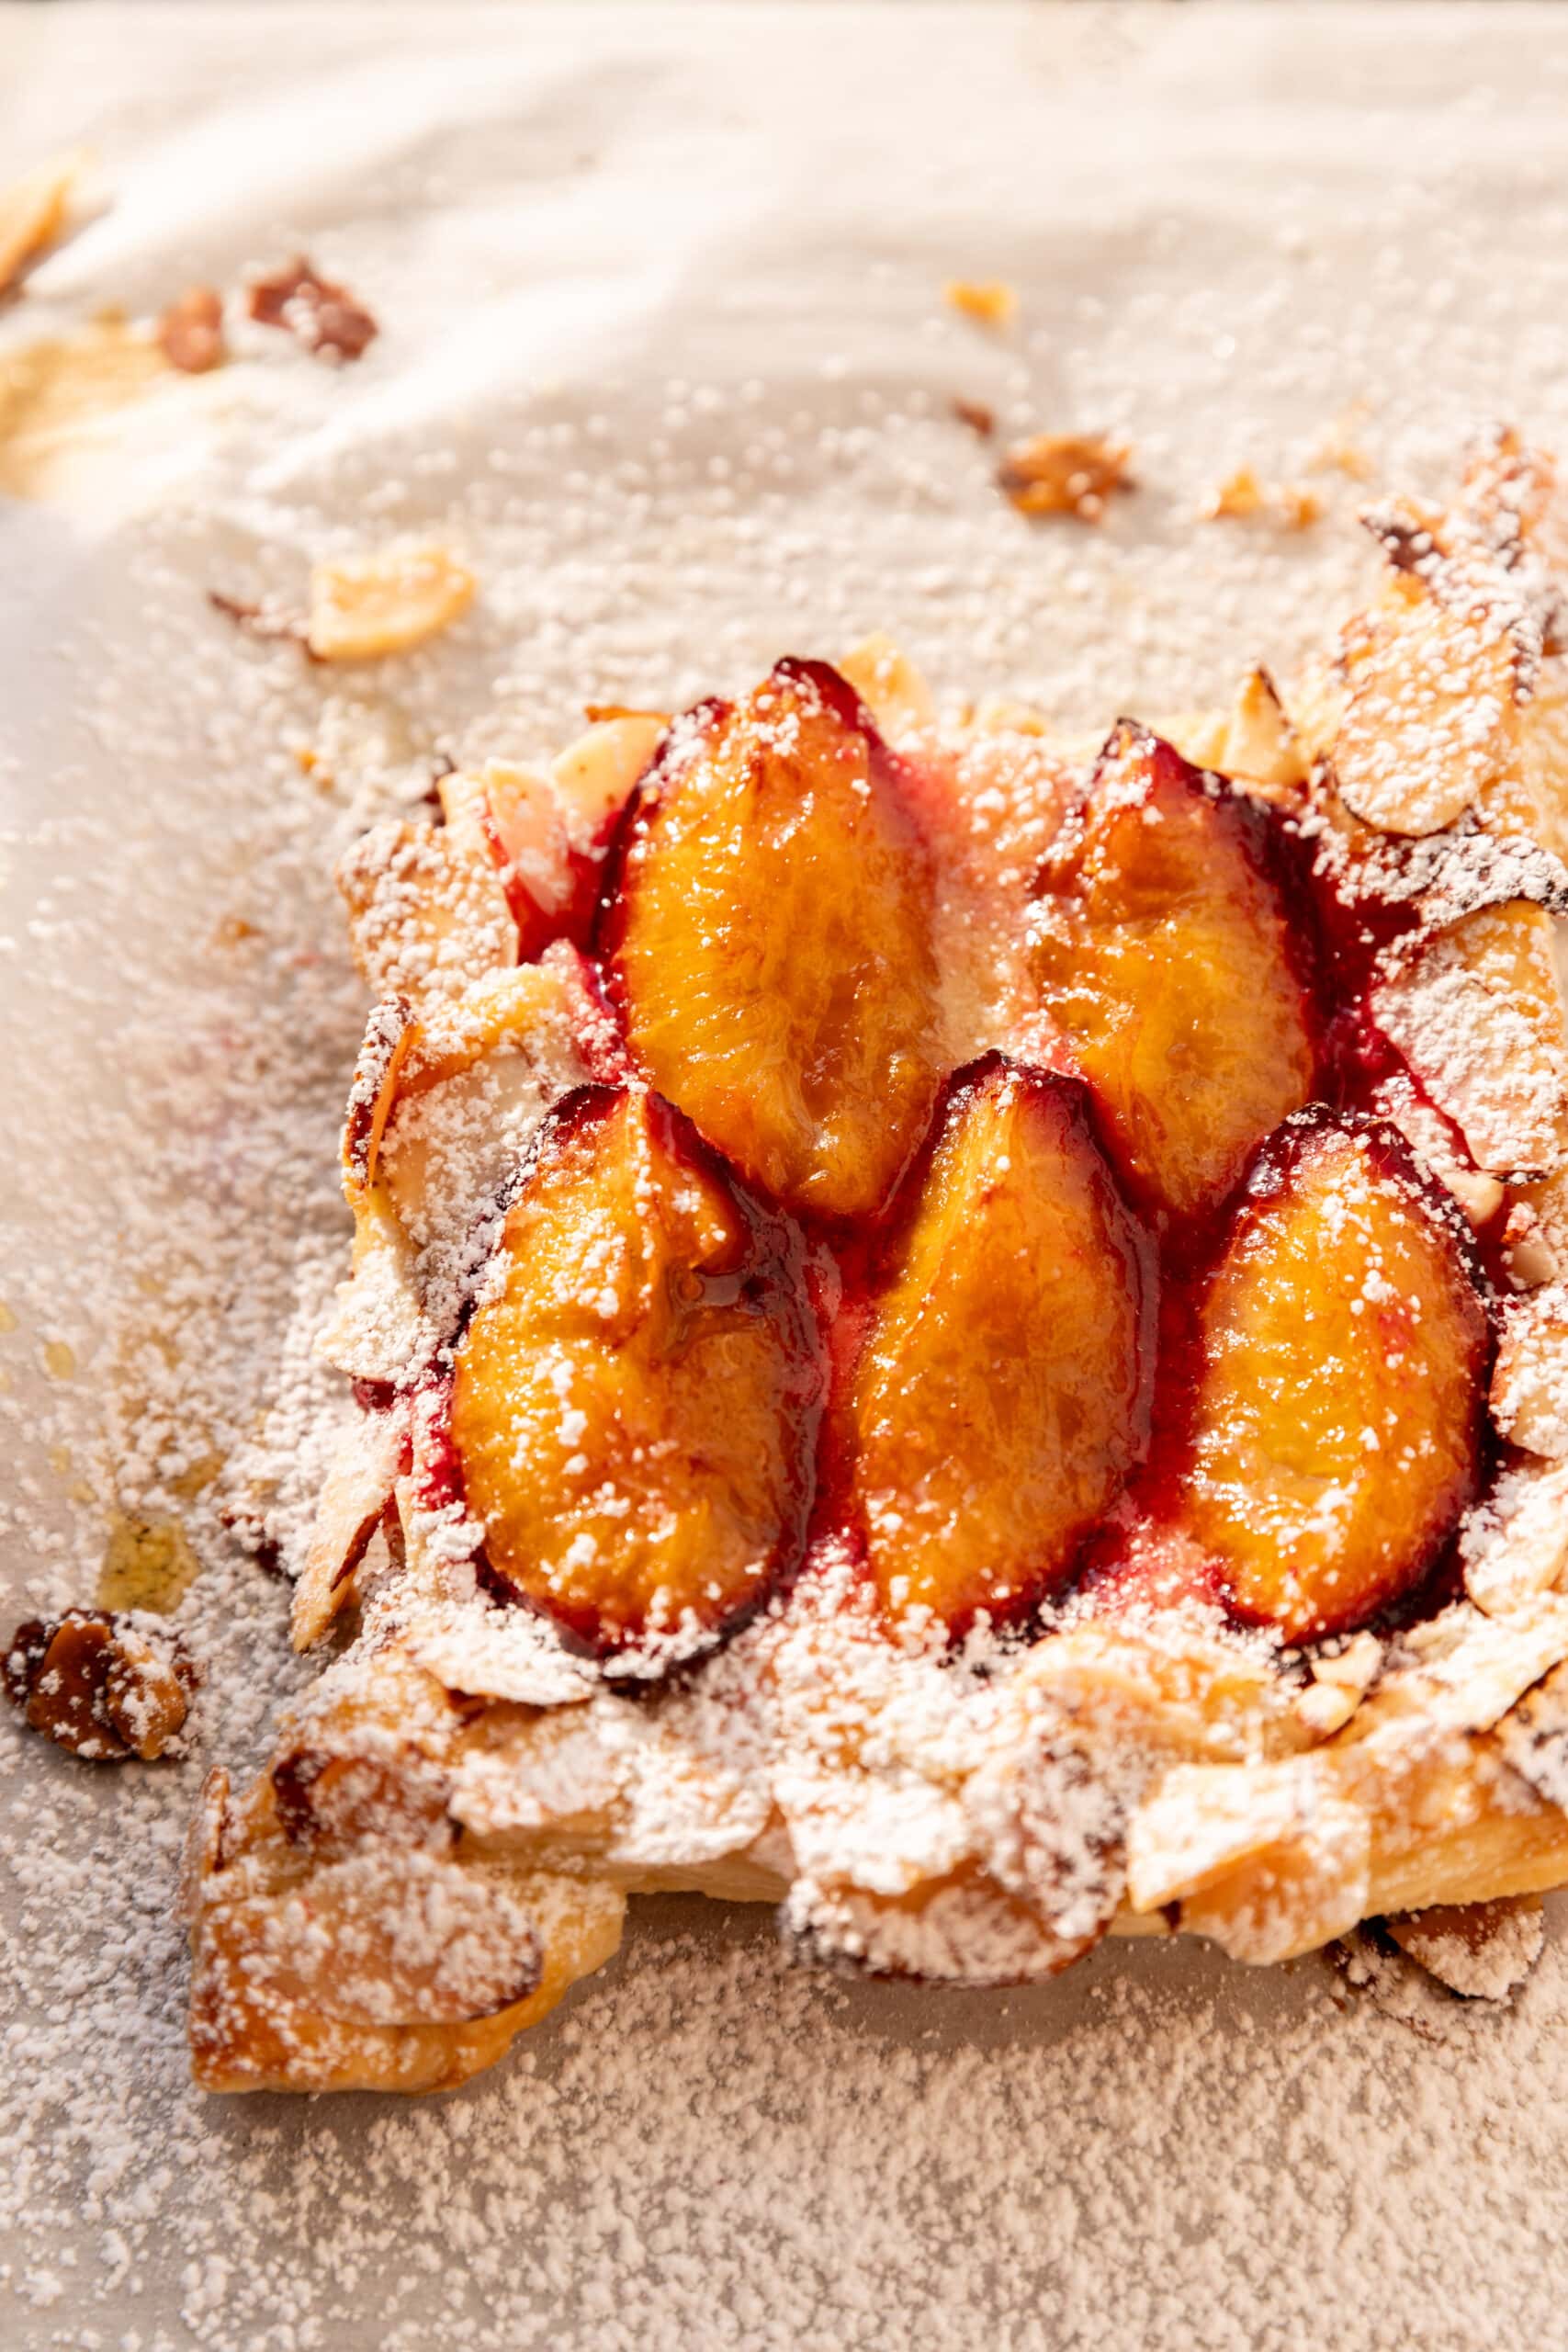 Angled view of a puff pastry plum tart with almond frangipane and a dusting of powdered sugar.